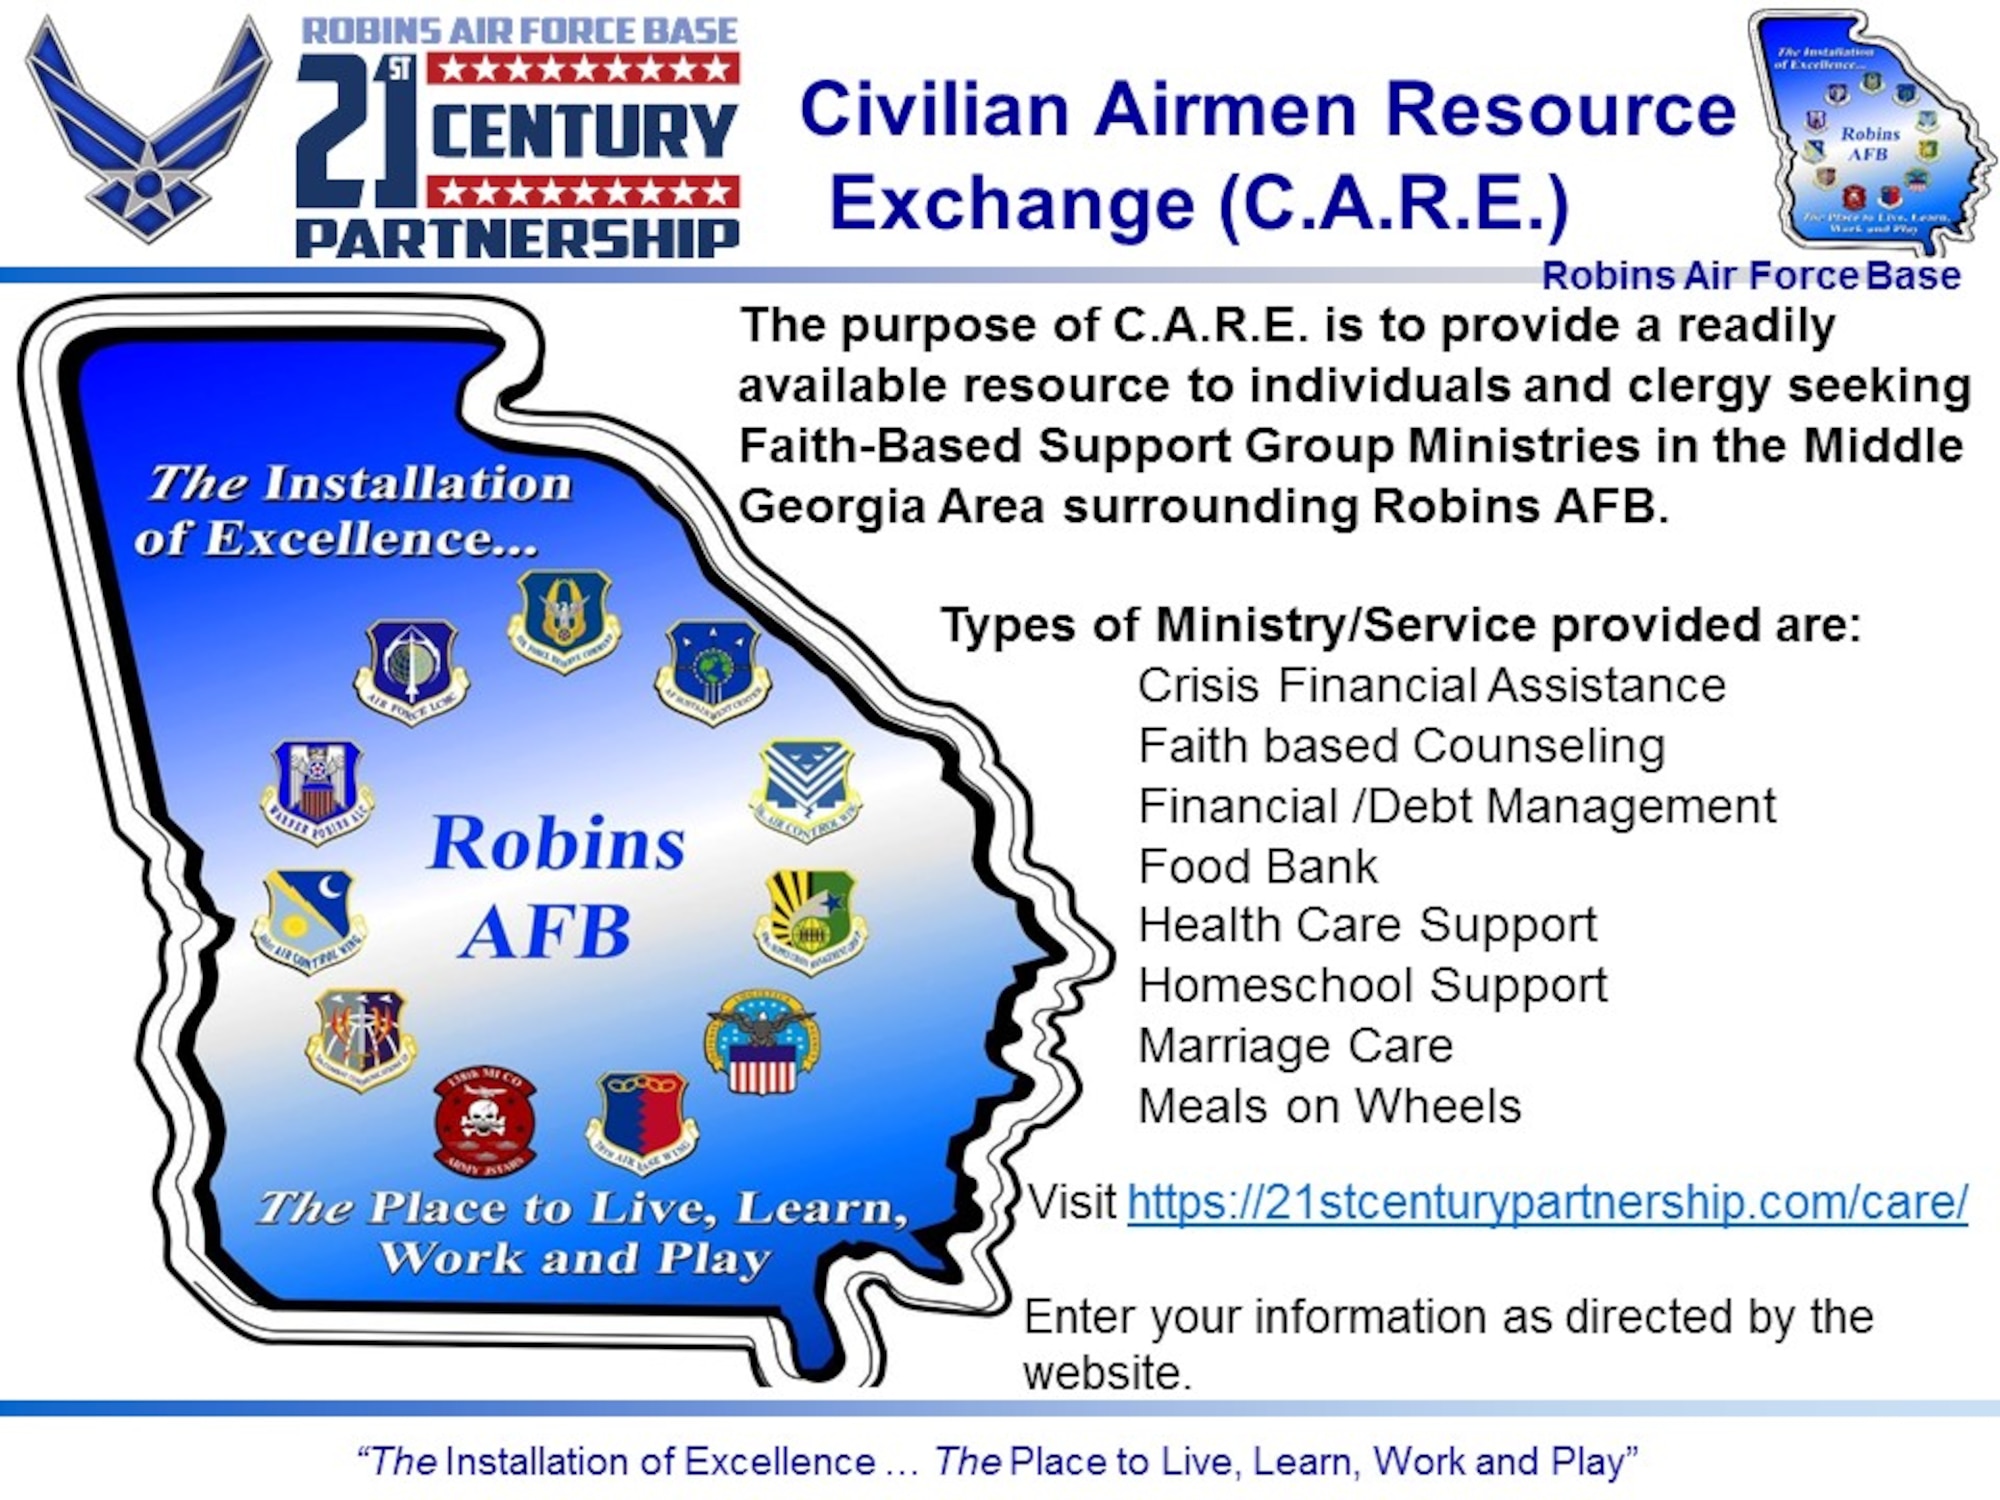 The purpose of C.A.R.E. is to provide a readily available resource to individuals and clergy seeking faith-based support group ministries in the Middle Georgia area. (U.S. Air Force graphic)